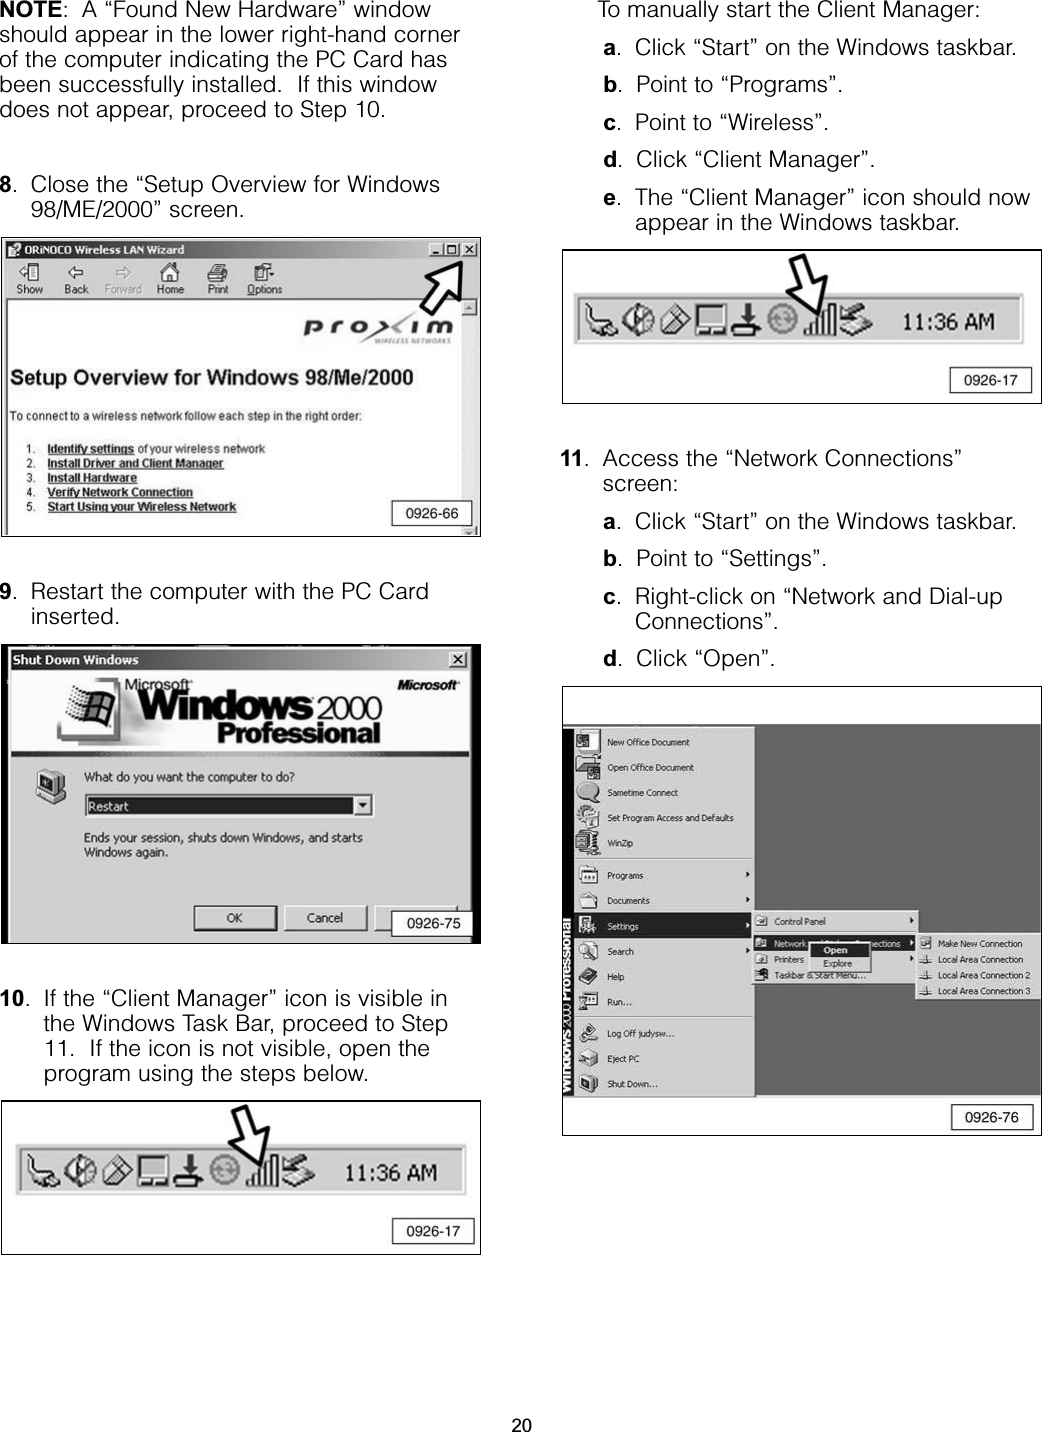 NOTE: A “Found New Hardware” windowshould appear in the lower right-hand cornerof the computer indicating the PC Card hasbeen successfully installed.  If this windowdoes not appear, proceed to Step 10.8. Close the “Setup Overview for Windows98/ME/2000” screen.9. Restart the computer with the PC Cardinserted.10. If the “Client Manager” icon is visible inthe Windows Task Bar, proceed to Step11.  If the icon is not visible, open theprogram using the steps below.To manually start the Client Manager:a. Click “Start” on the Windows taskbar.b. Point to “Programs”.c. Point to “Wireless”.d. Click “Client Manager”.e. The “Client Manager” icon should nowappear in the Windows taskbar. 11. Access the “Network Connections”screen: a. Click “Start” on the Windows taskbar.b. Point to “Settings”.c. Right-click on “Network and Dial-upConnections”.d. Click “Open”.20